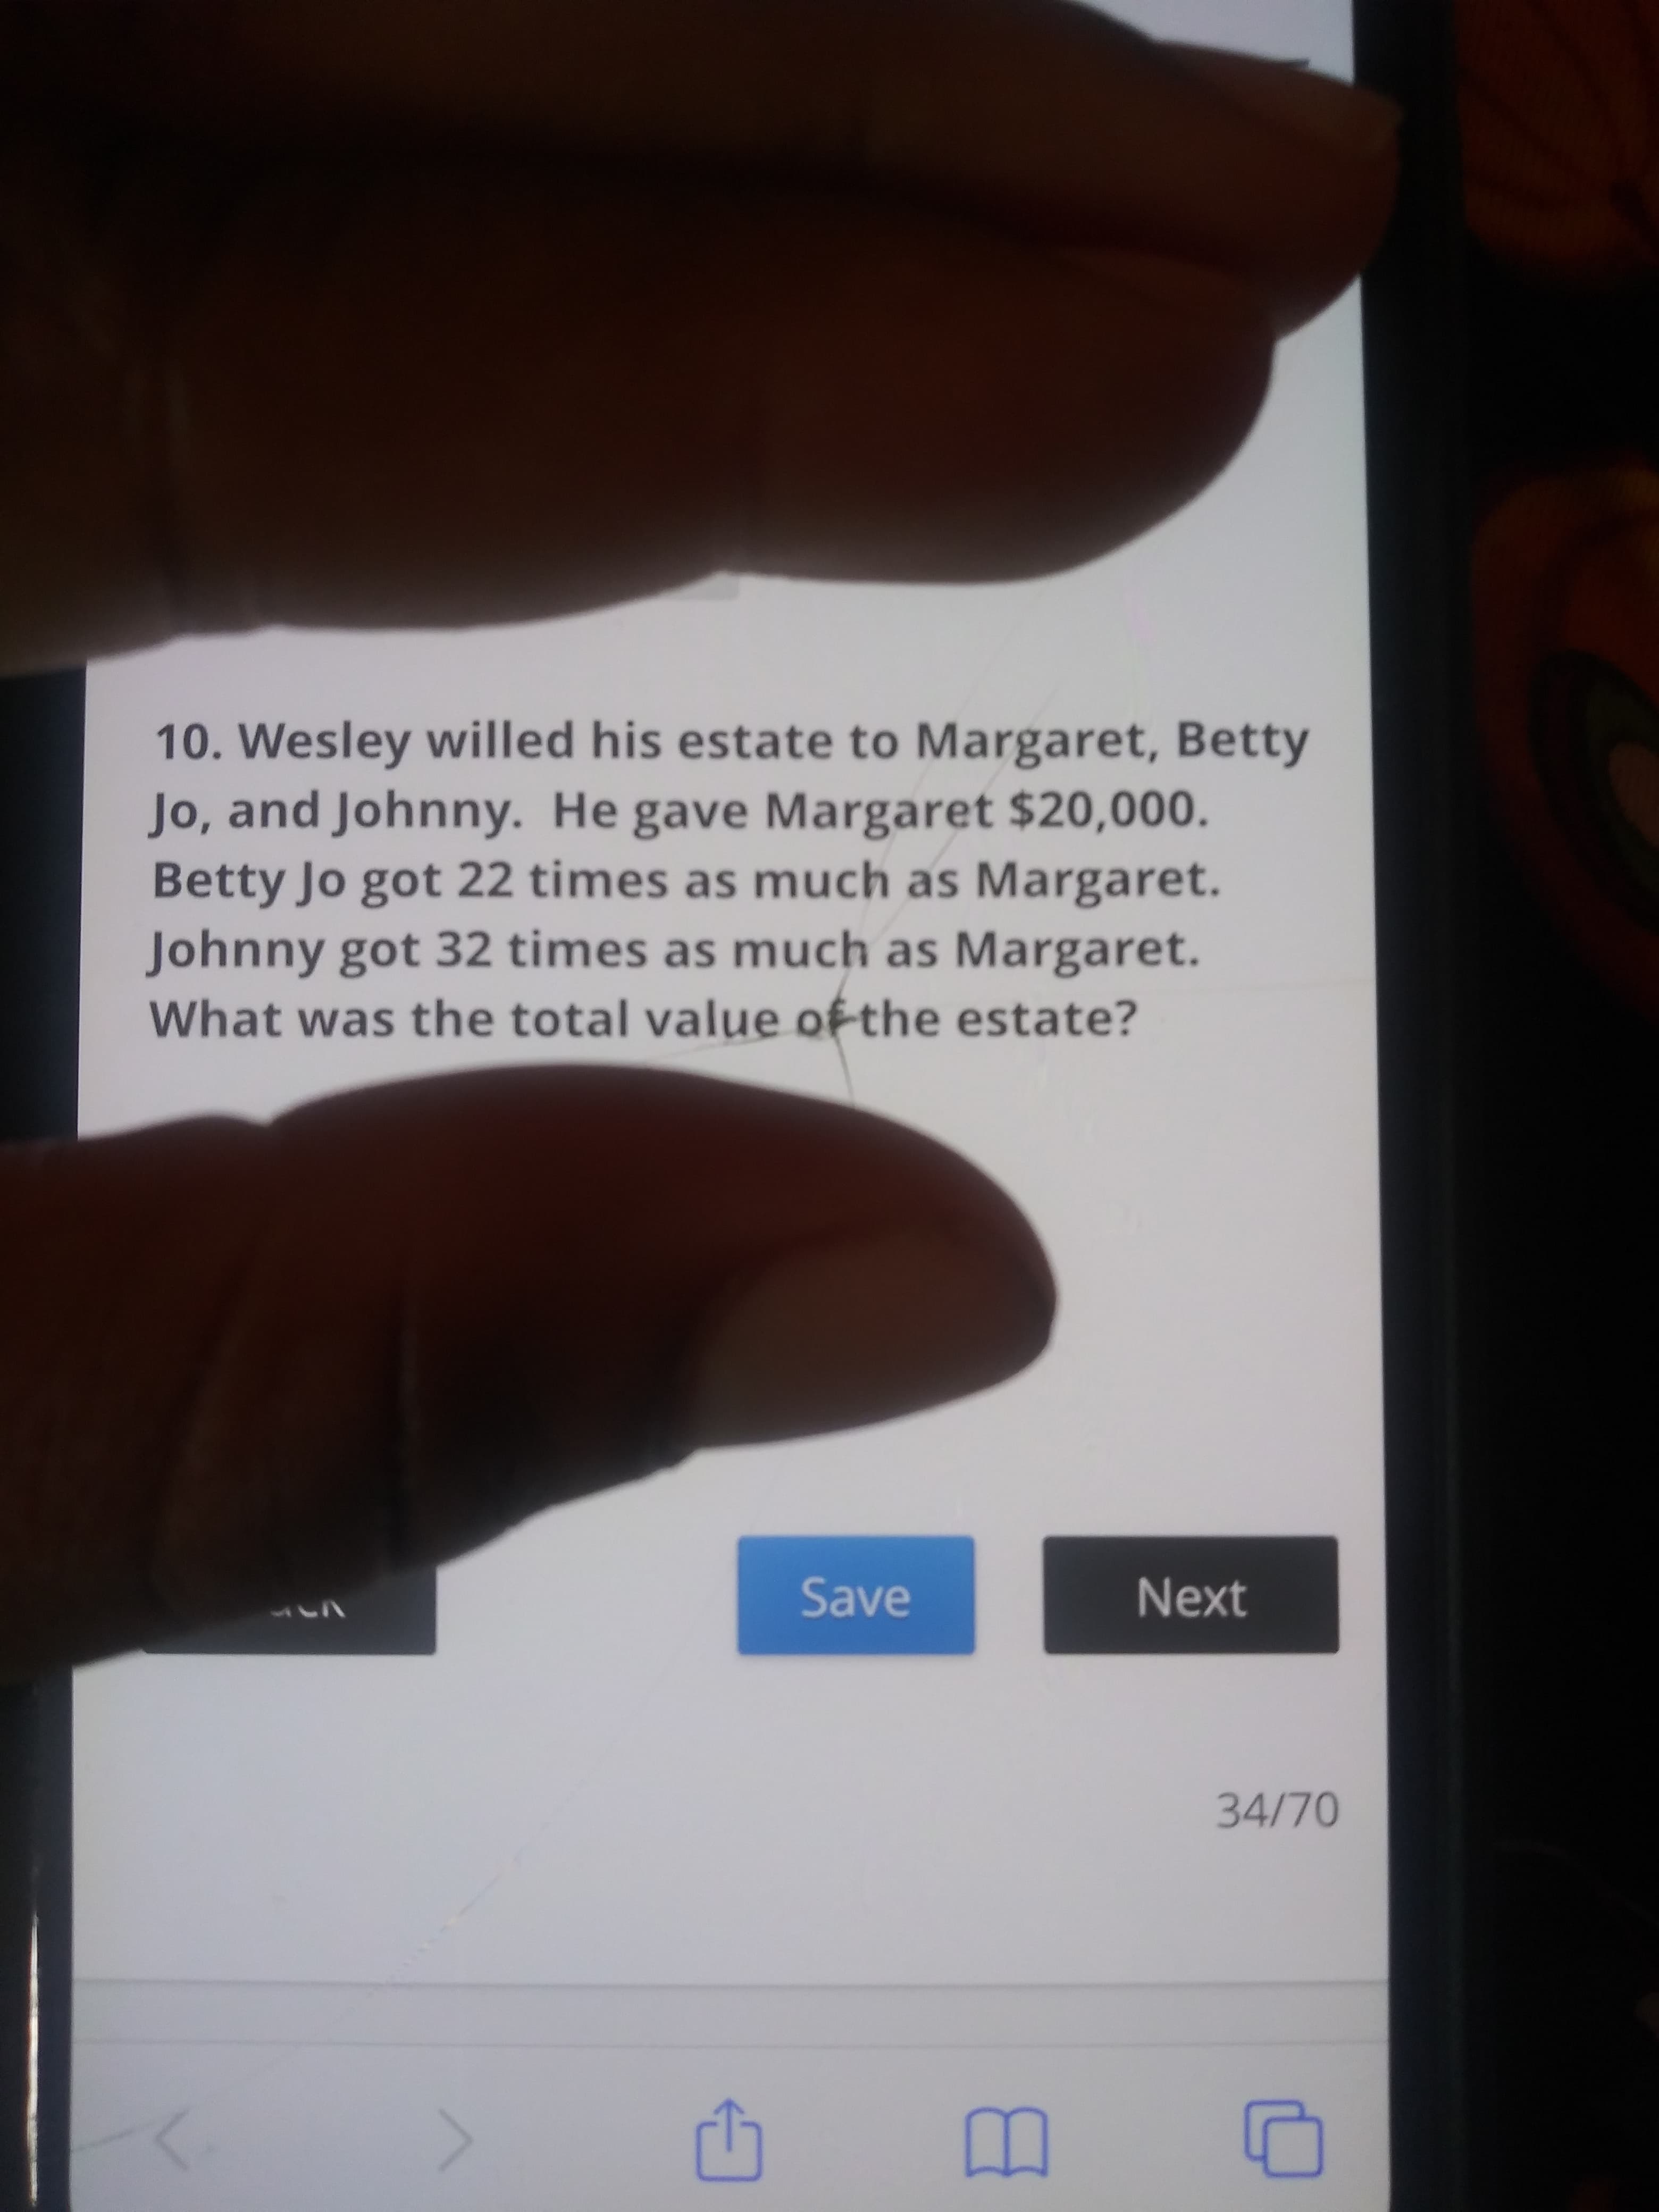 10. Wesley willed his estate to Margaret, Betty
Jo, and Johnny. He gave Margaret $20,000.
Betty Jo got 22 times as much as Margaret.
Johnny got 32 times as much as Margaret.
What was the total value of the estate?
